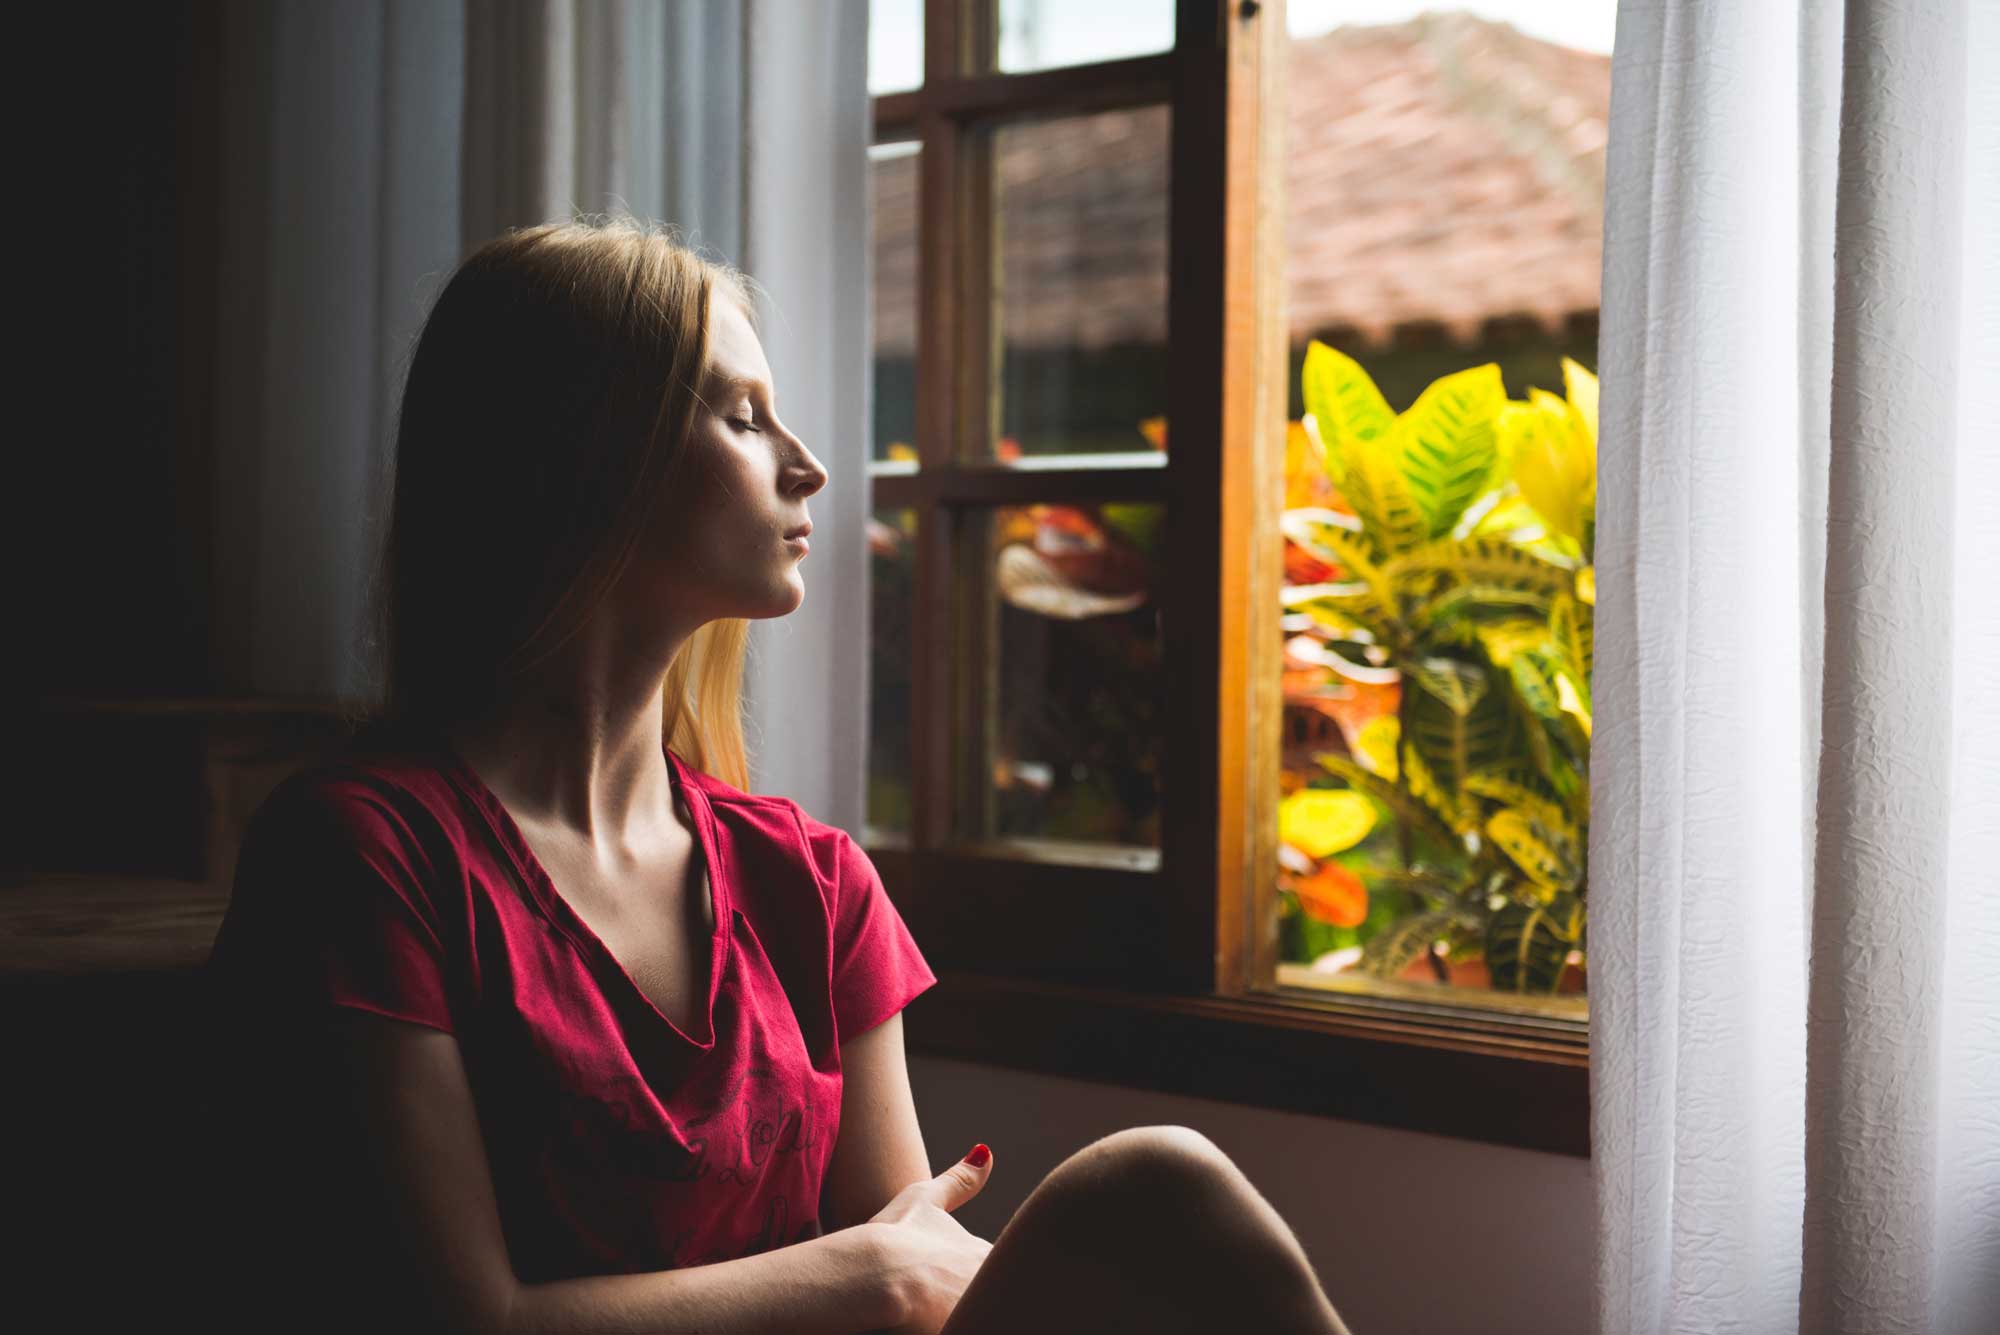 A woman sitting in front of a window looking out.